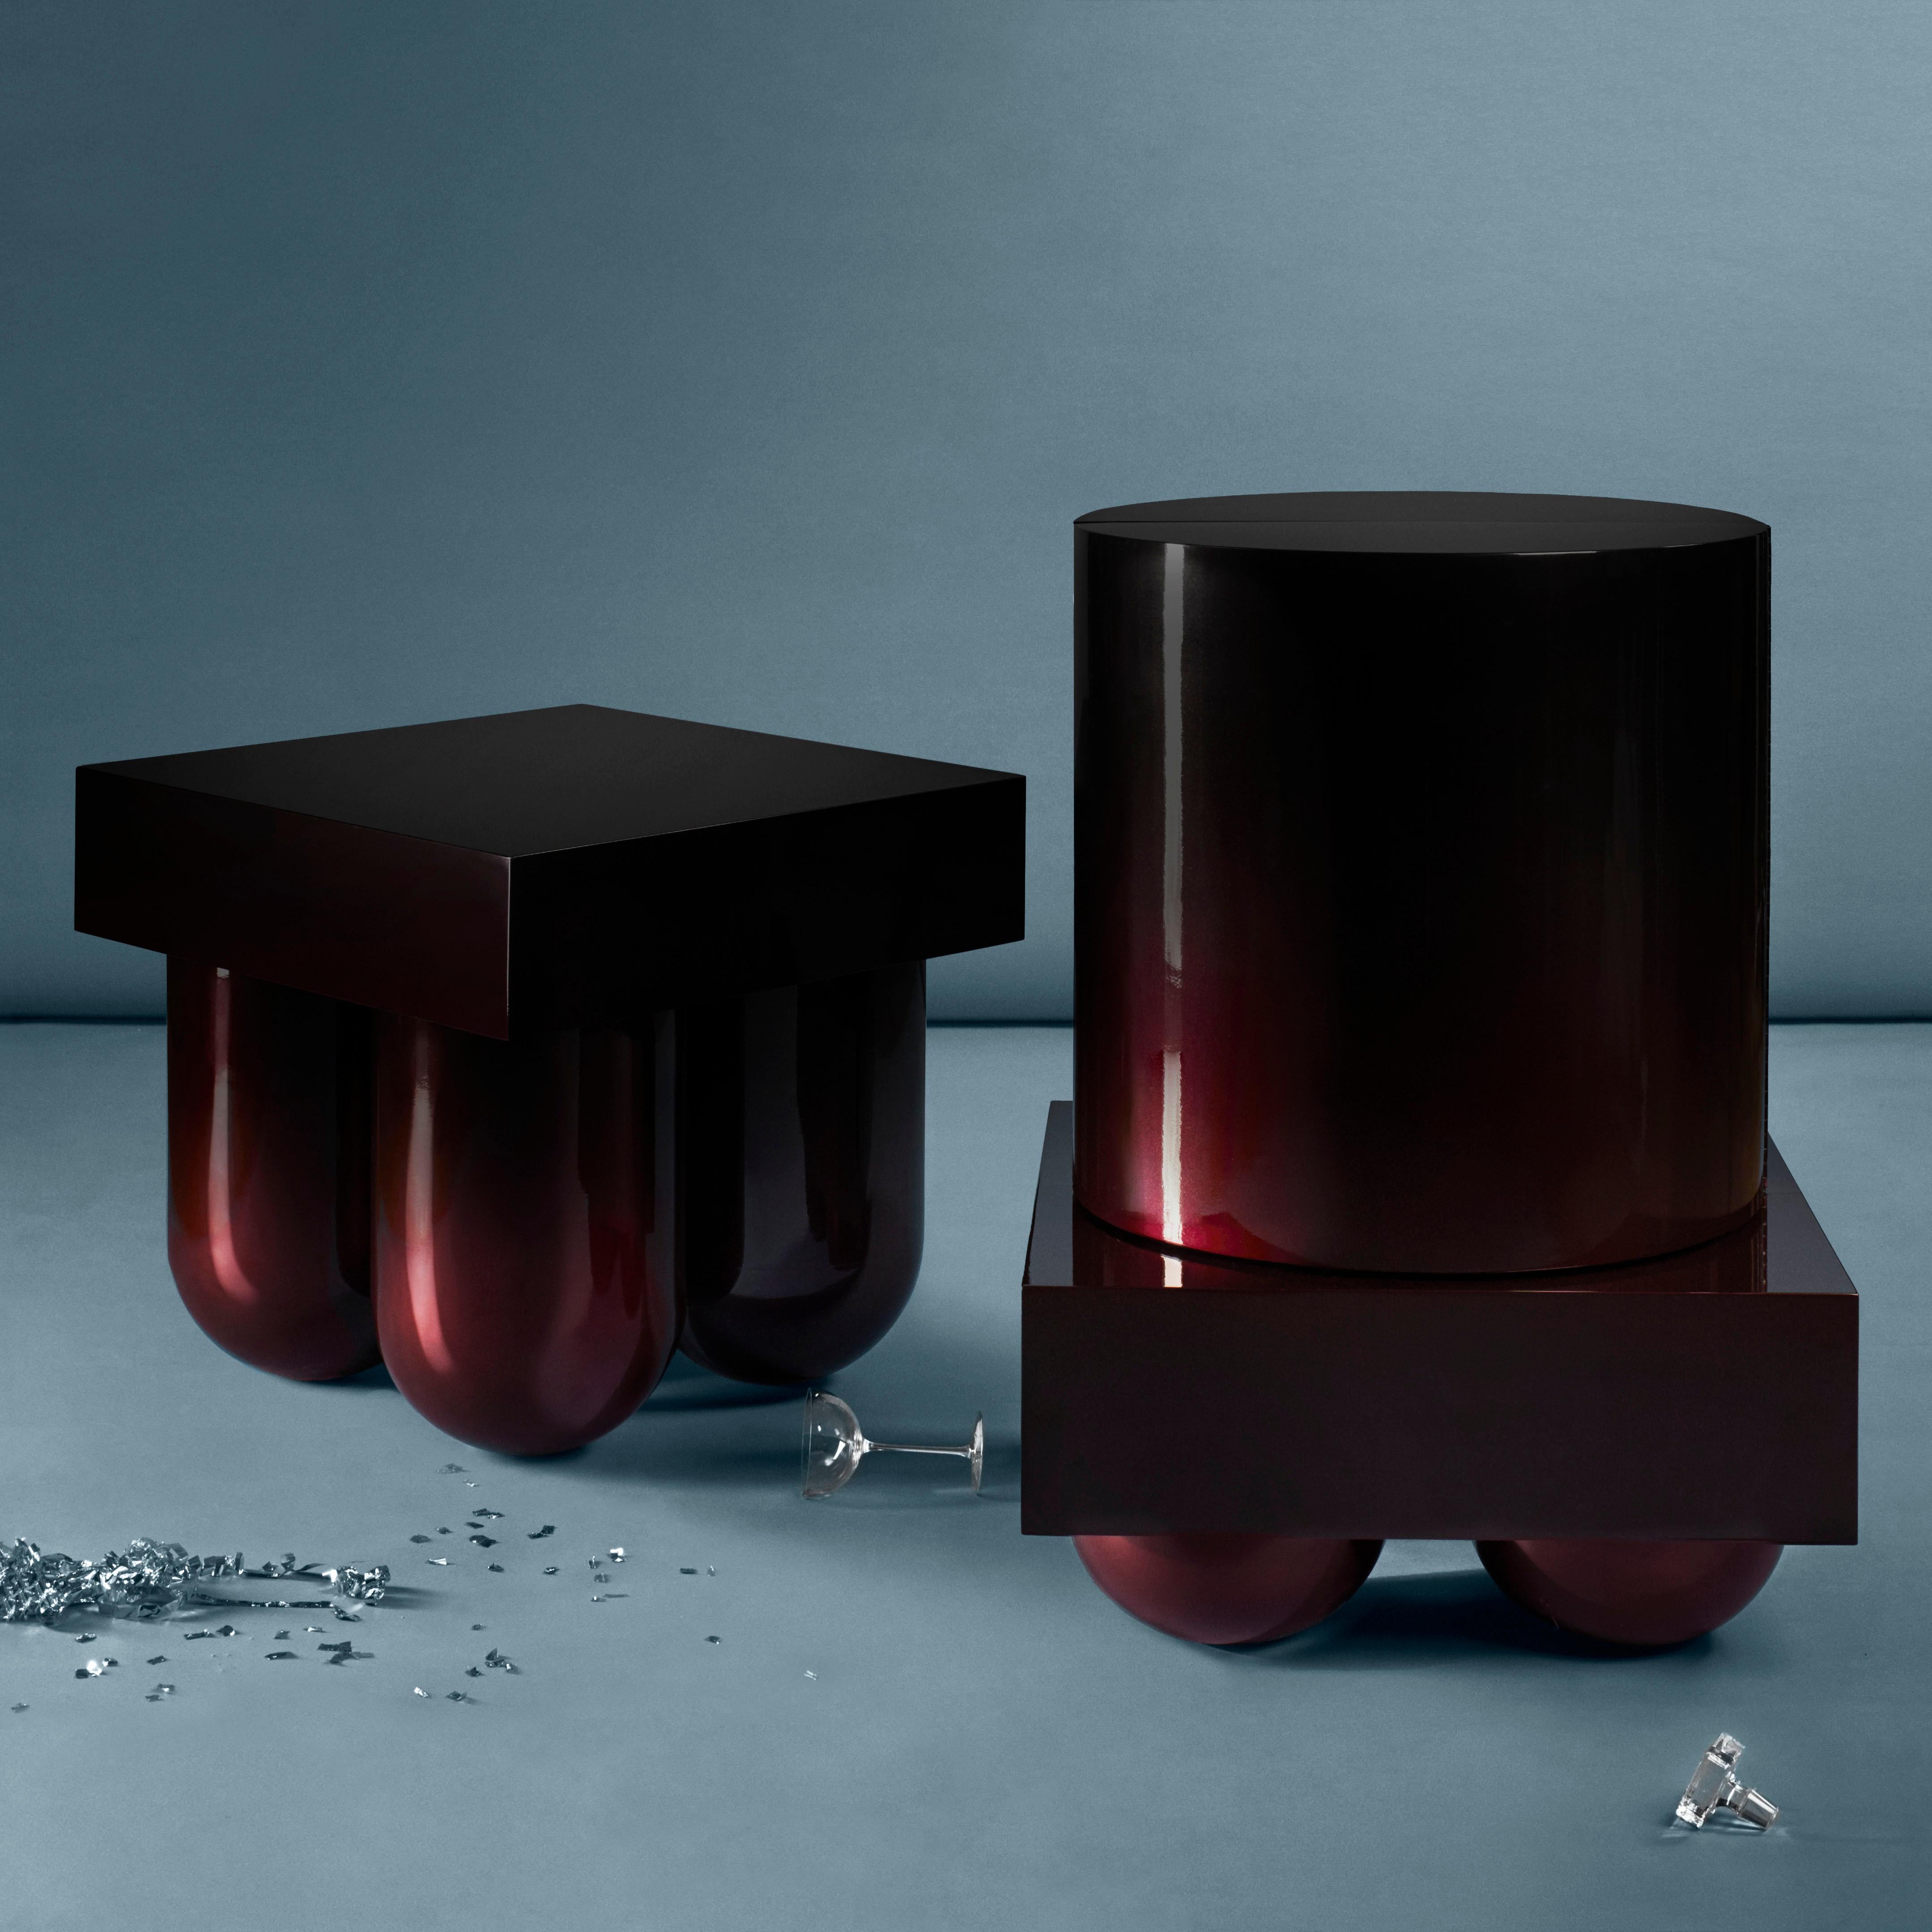 Set of minibar and side table by Müsing-Sellés
Dimensions: W 60 x D 60 x H 80 cm minibar
W 60 x 60 x H 60 cm side table
Materials: Carved wood, high gloss car-paint metallic lacquer

Color finish options: Maroon/red gradient
indigo/blue